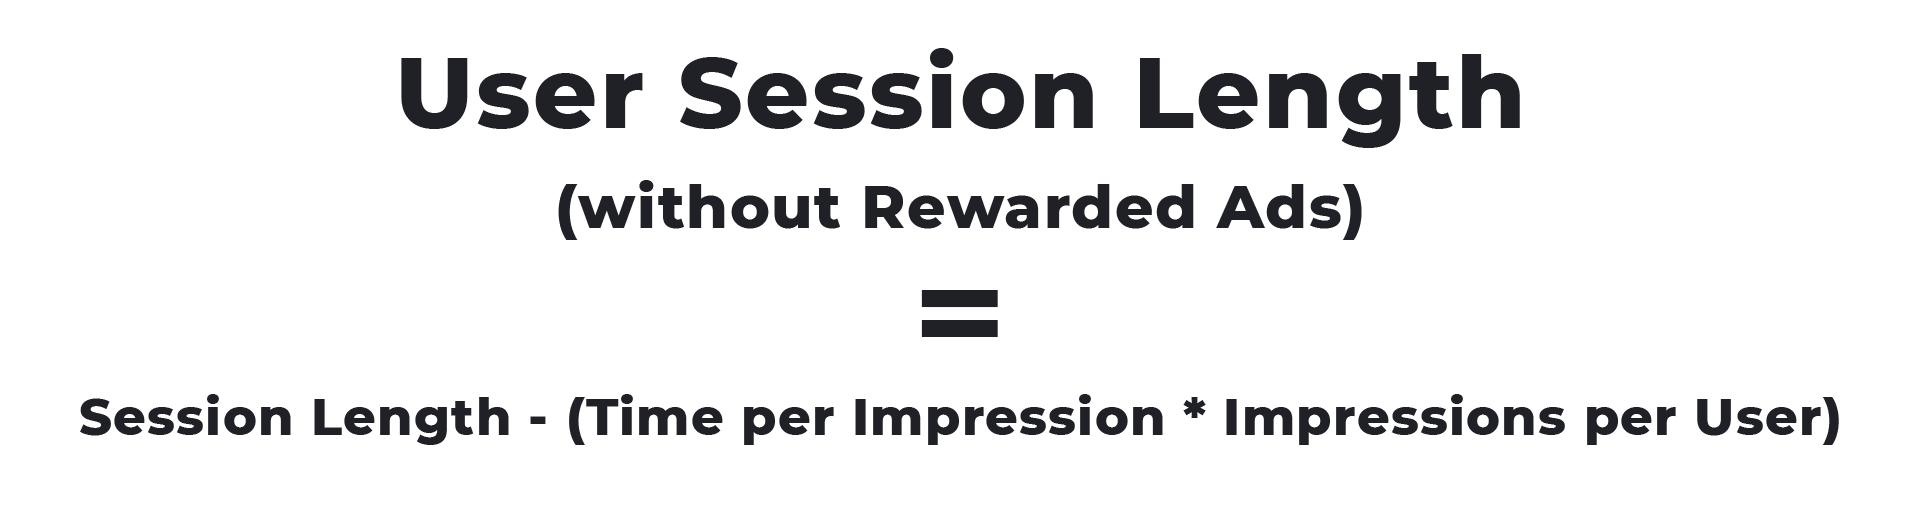 Impression period with Rewarded Ads User Length 2